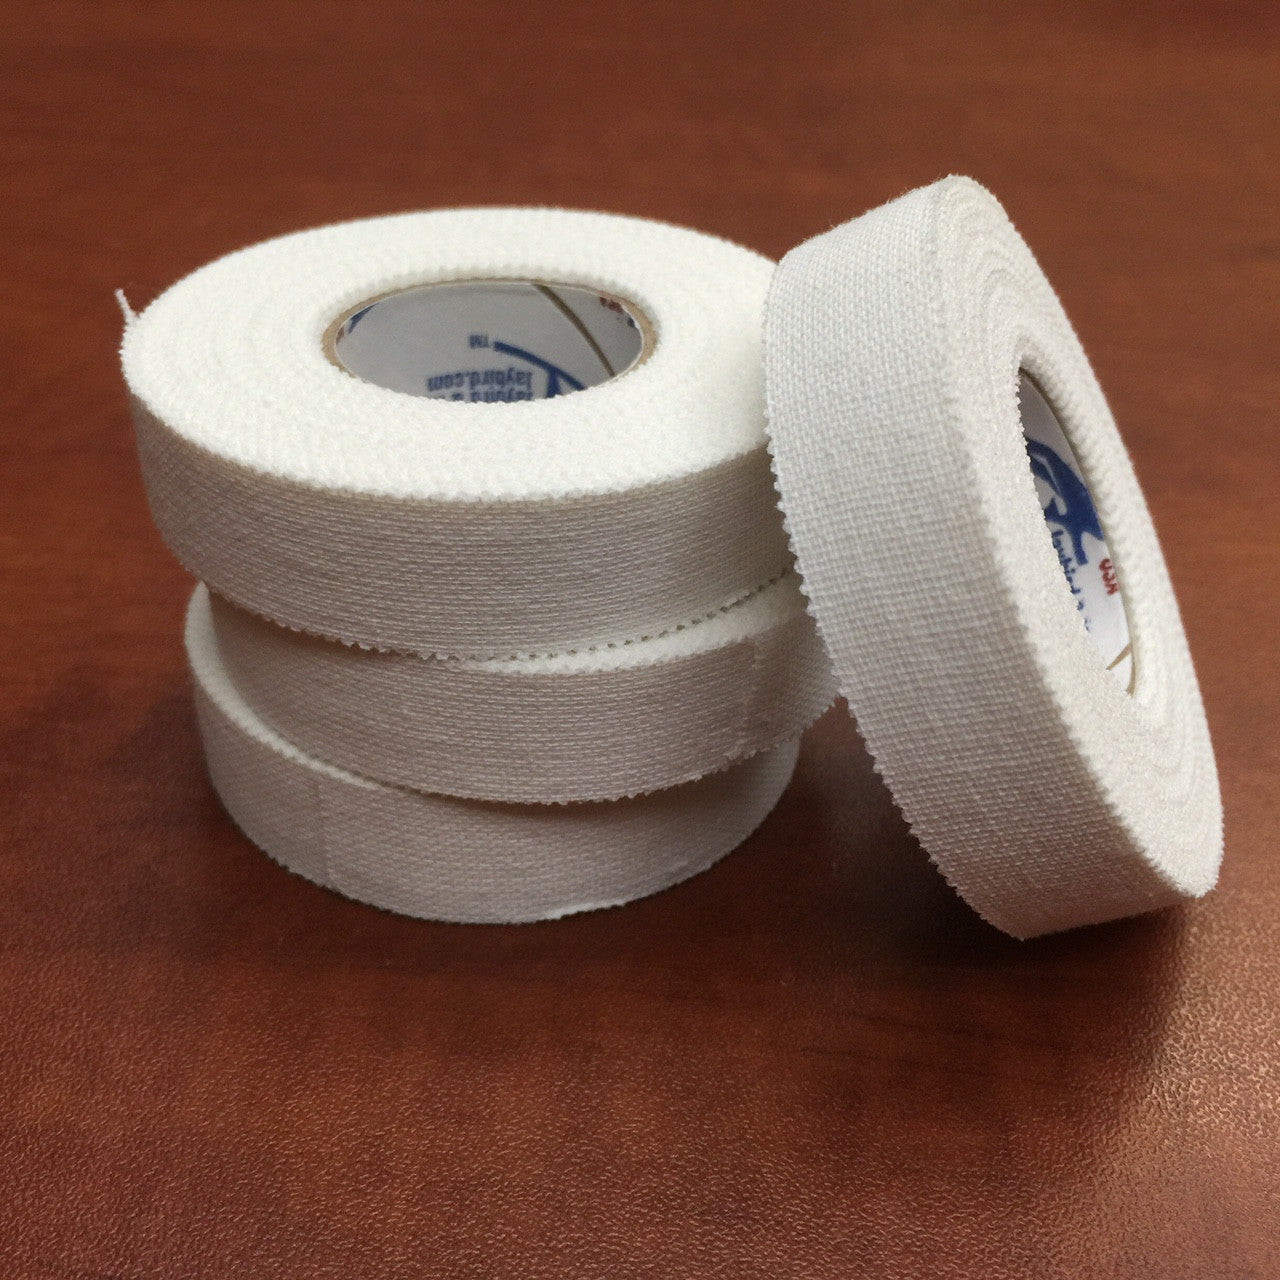 1/2 Inch Trainers Tape - White (4 pack) - Budovideos Inc